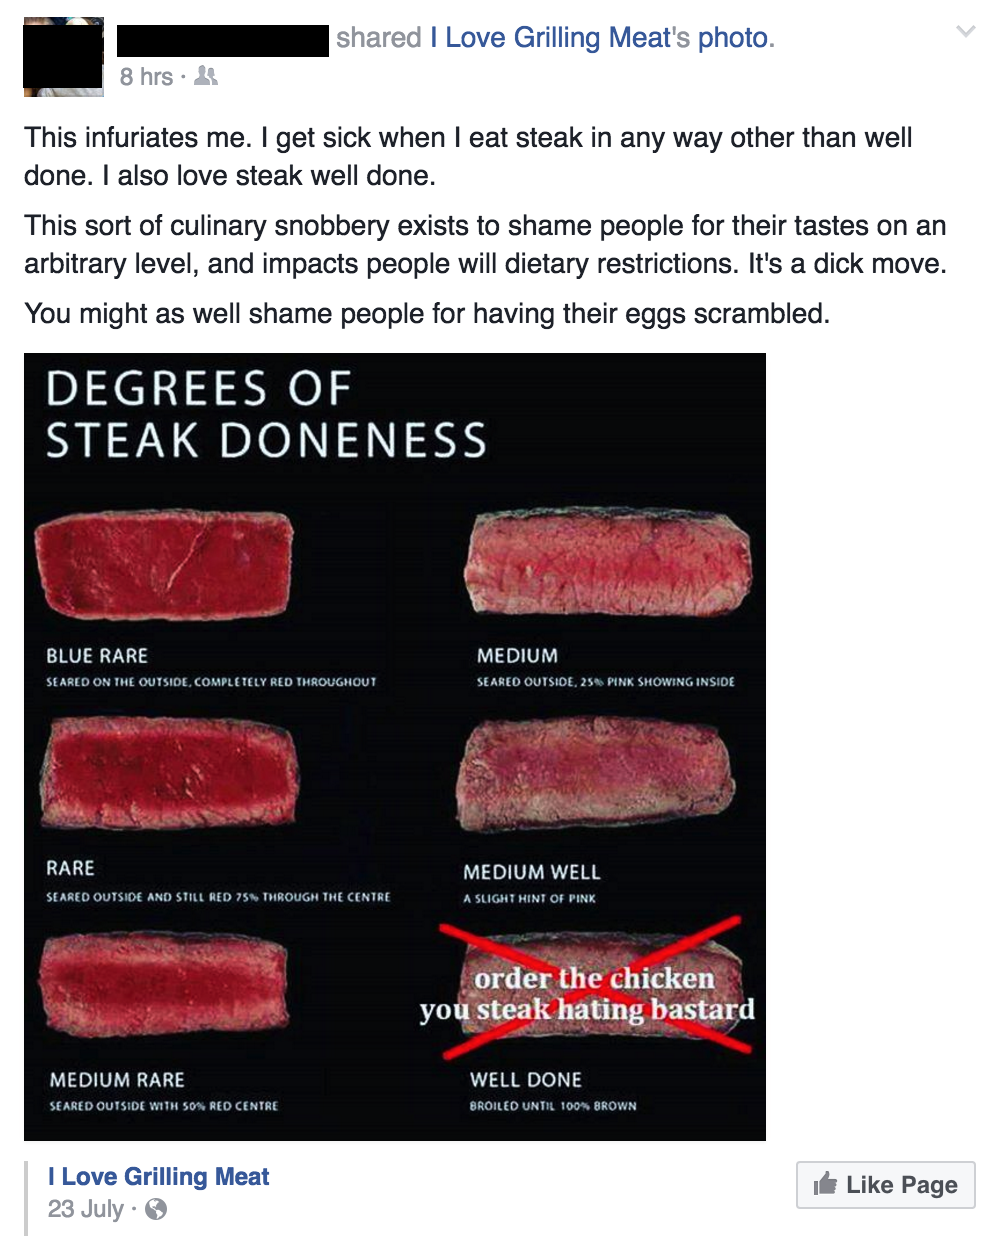 lip - d I Love Grilling Meat's photo 8 hrs. This infuriates me. I get sick when I eat steak in any way other than well done. I also love steak well done. This sort of culinary snobbery exists to shame people for their tastes on an arbitrary level, and imp